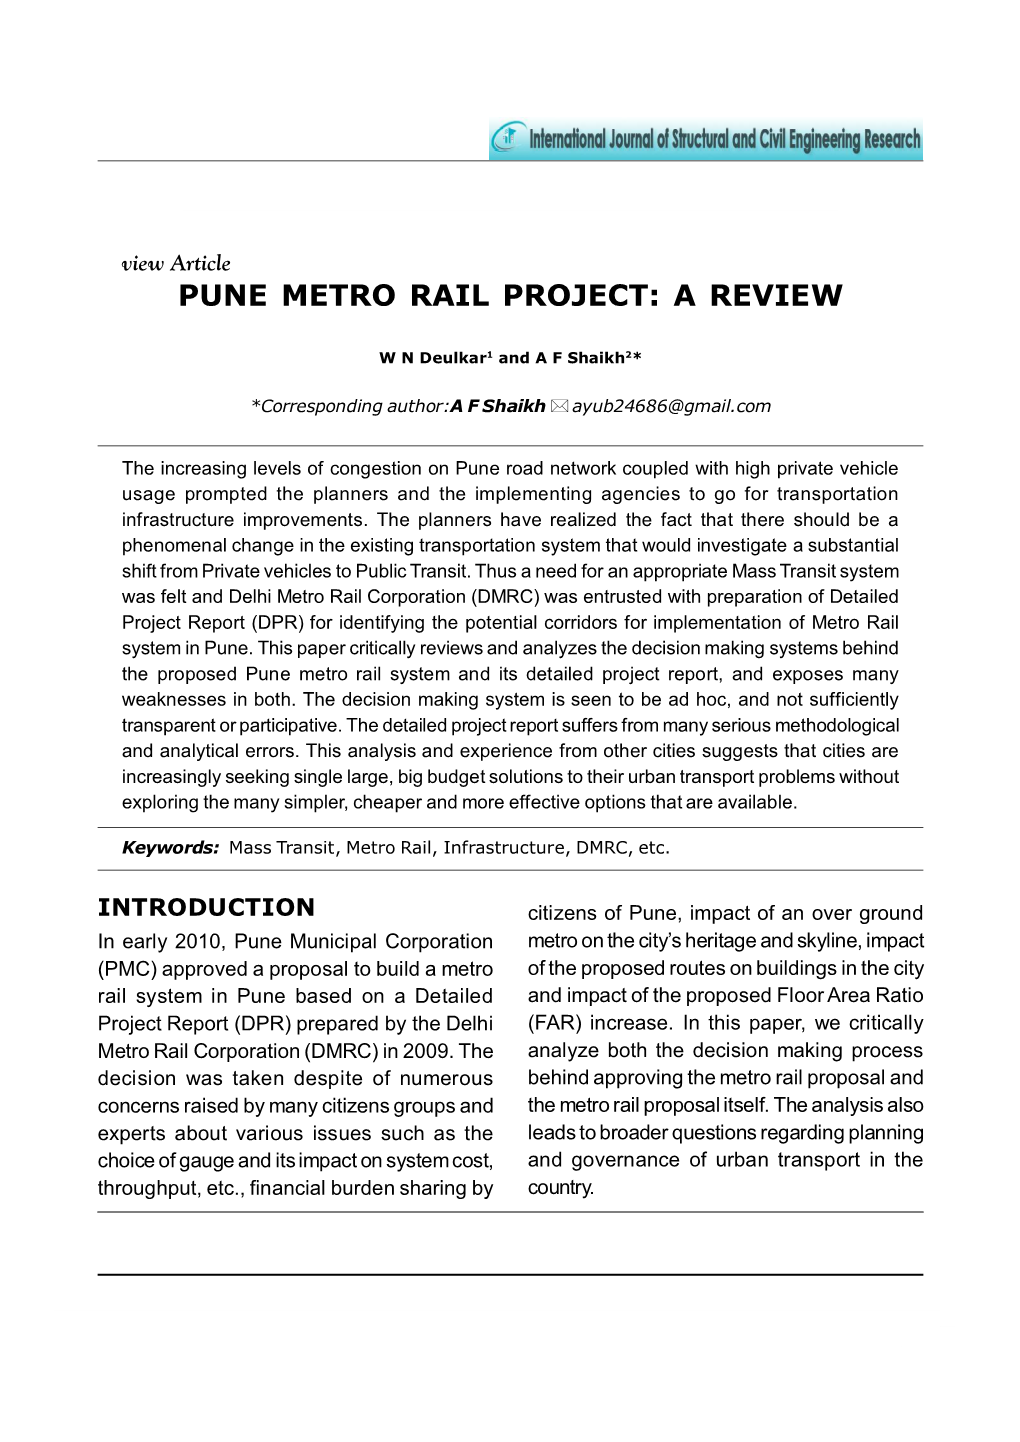 Pune Metro Rail Project: a Review